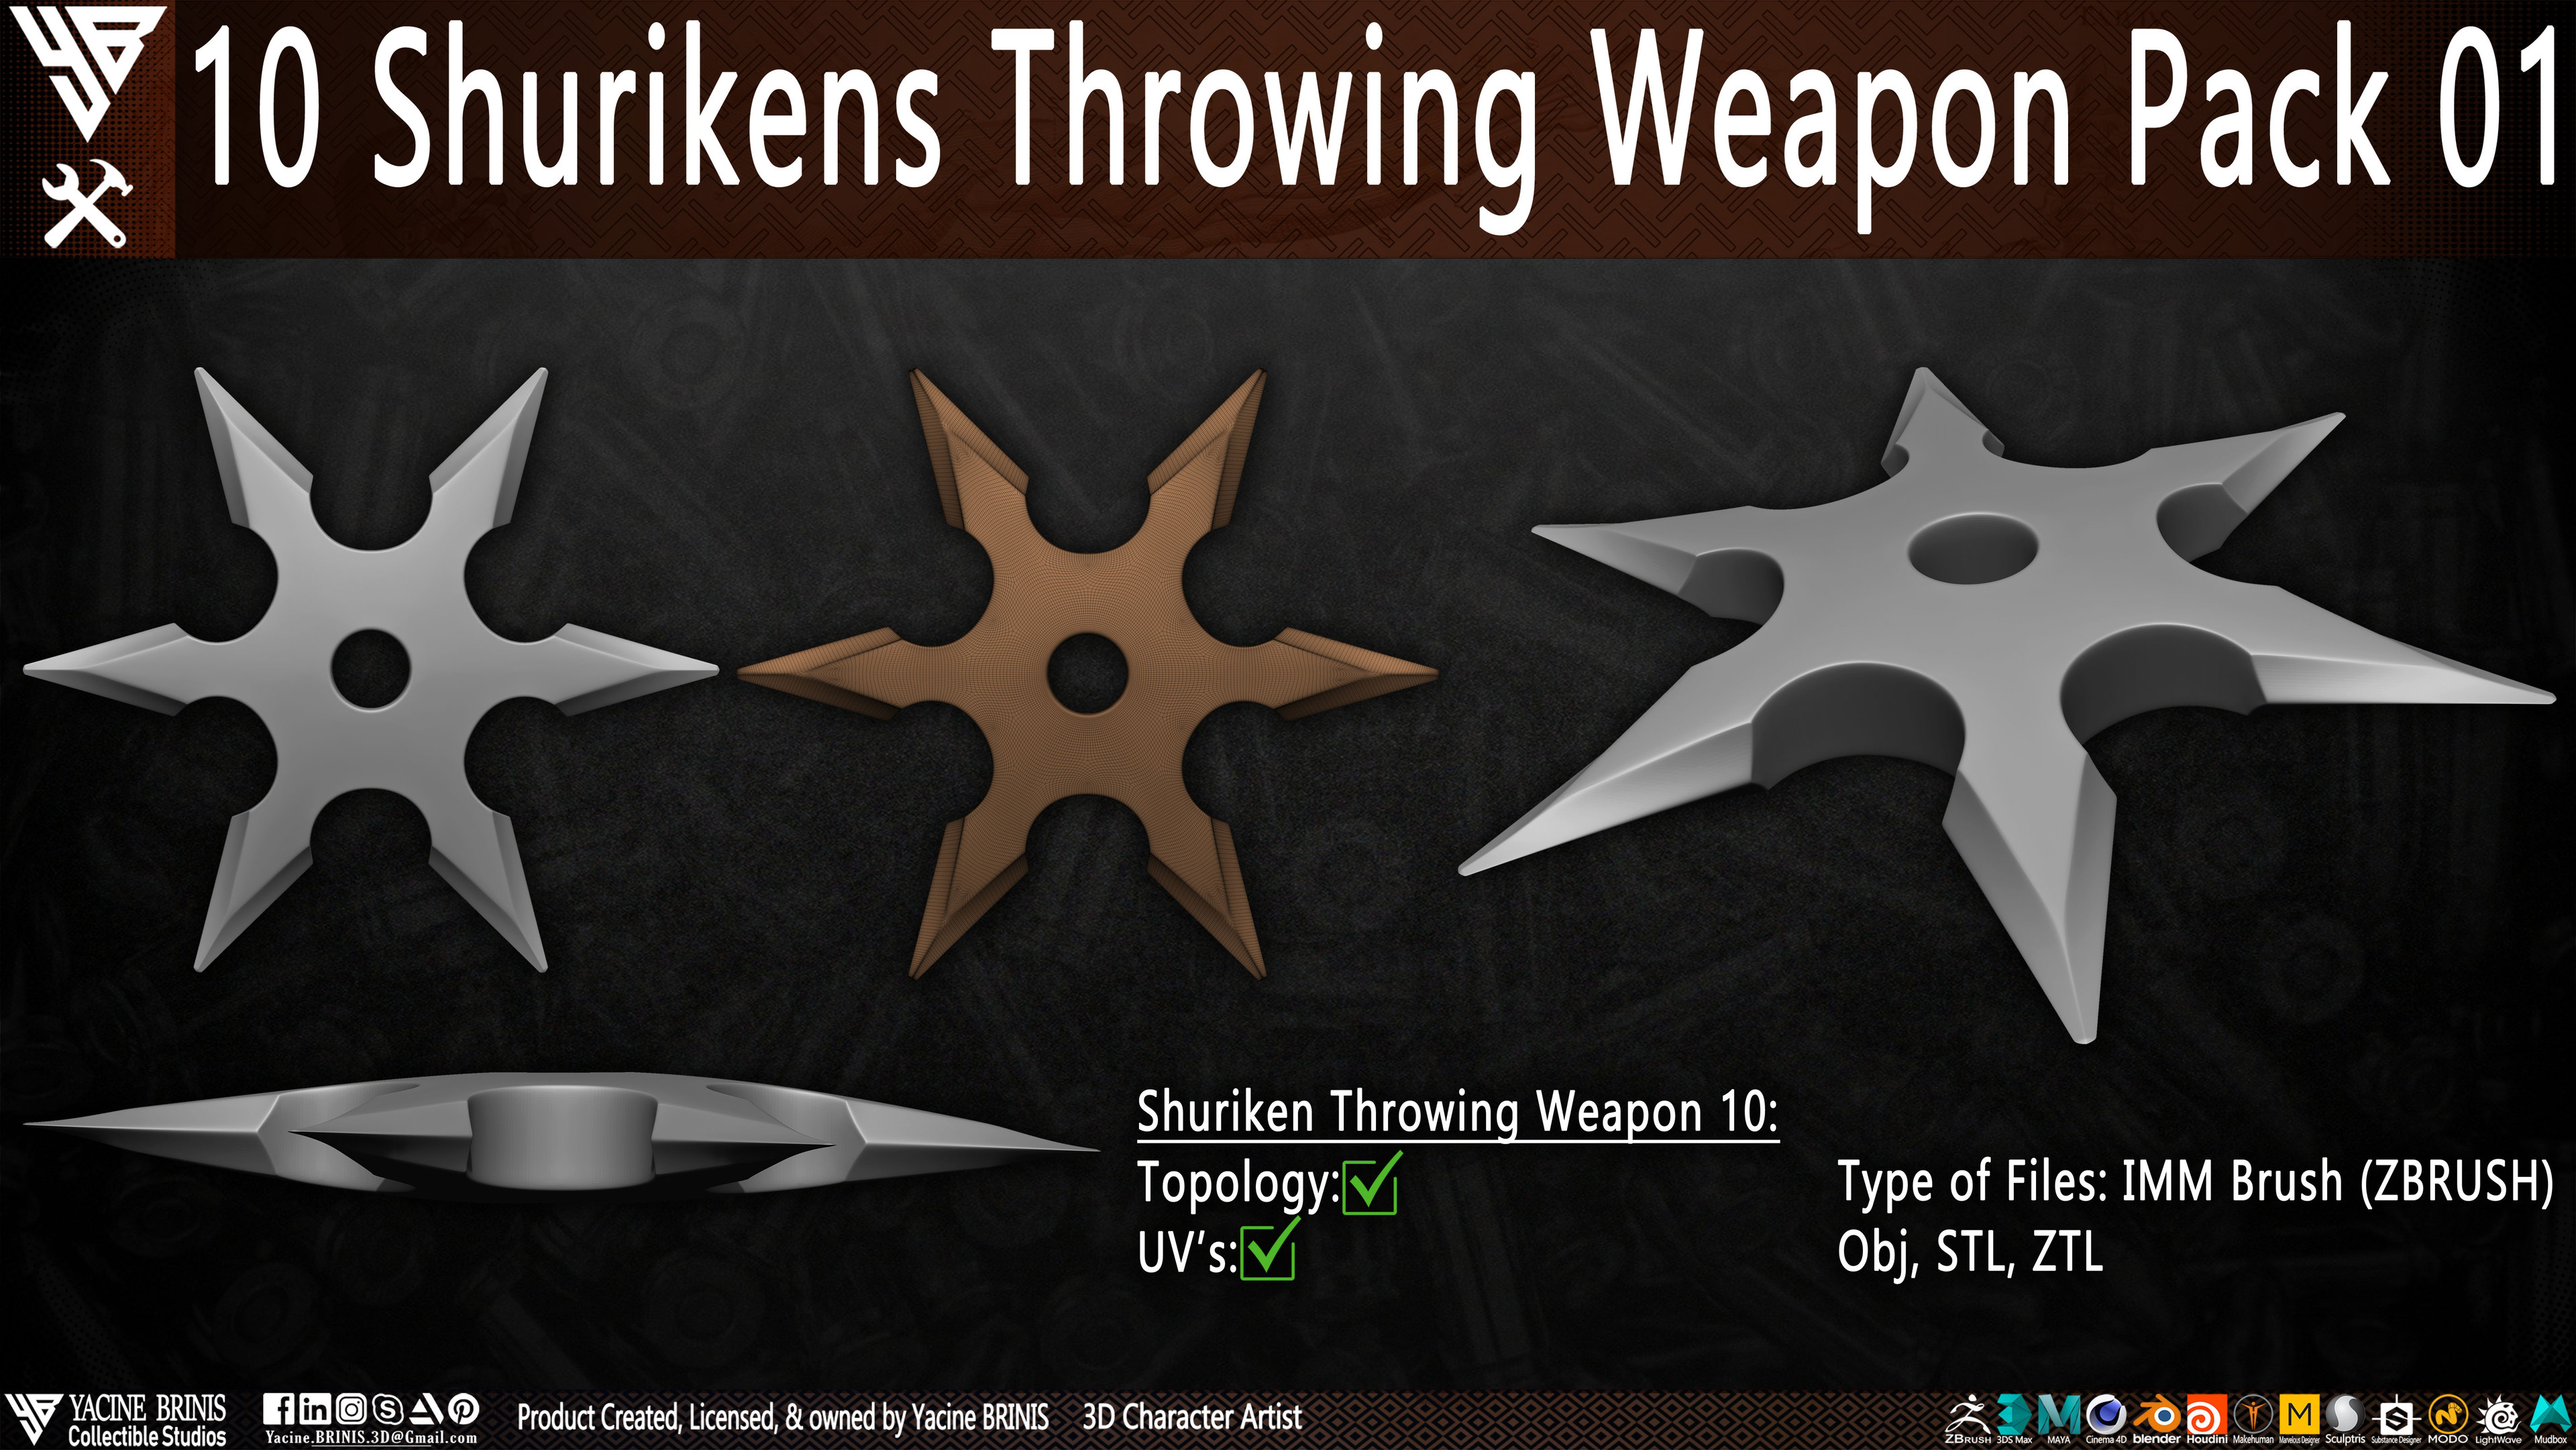 10 Shurikens Throwing Weapon Pack 01 sculpted by Yacine BRINIS Set 13